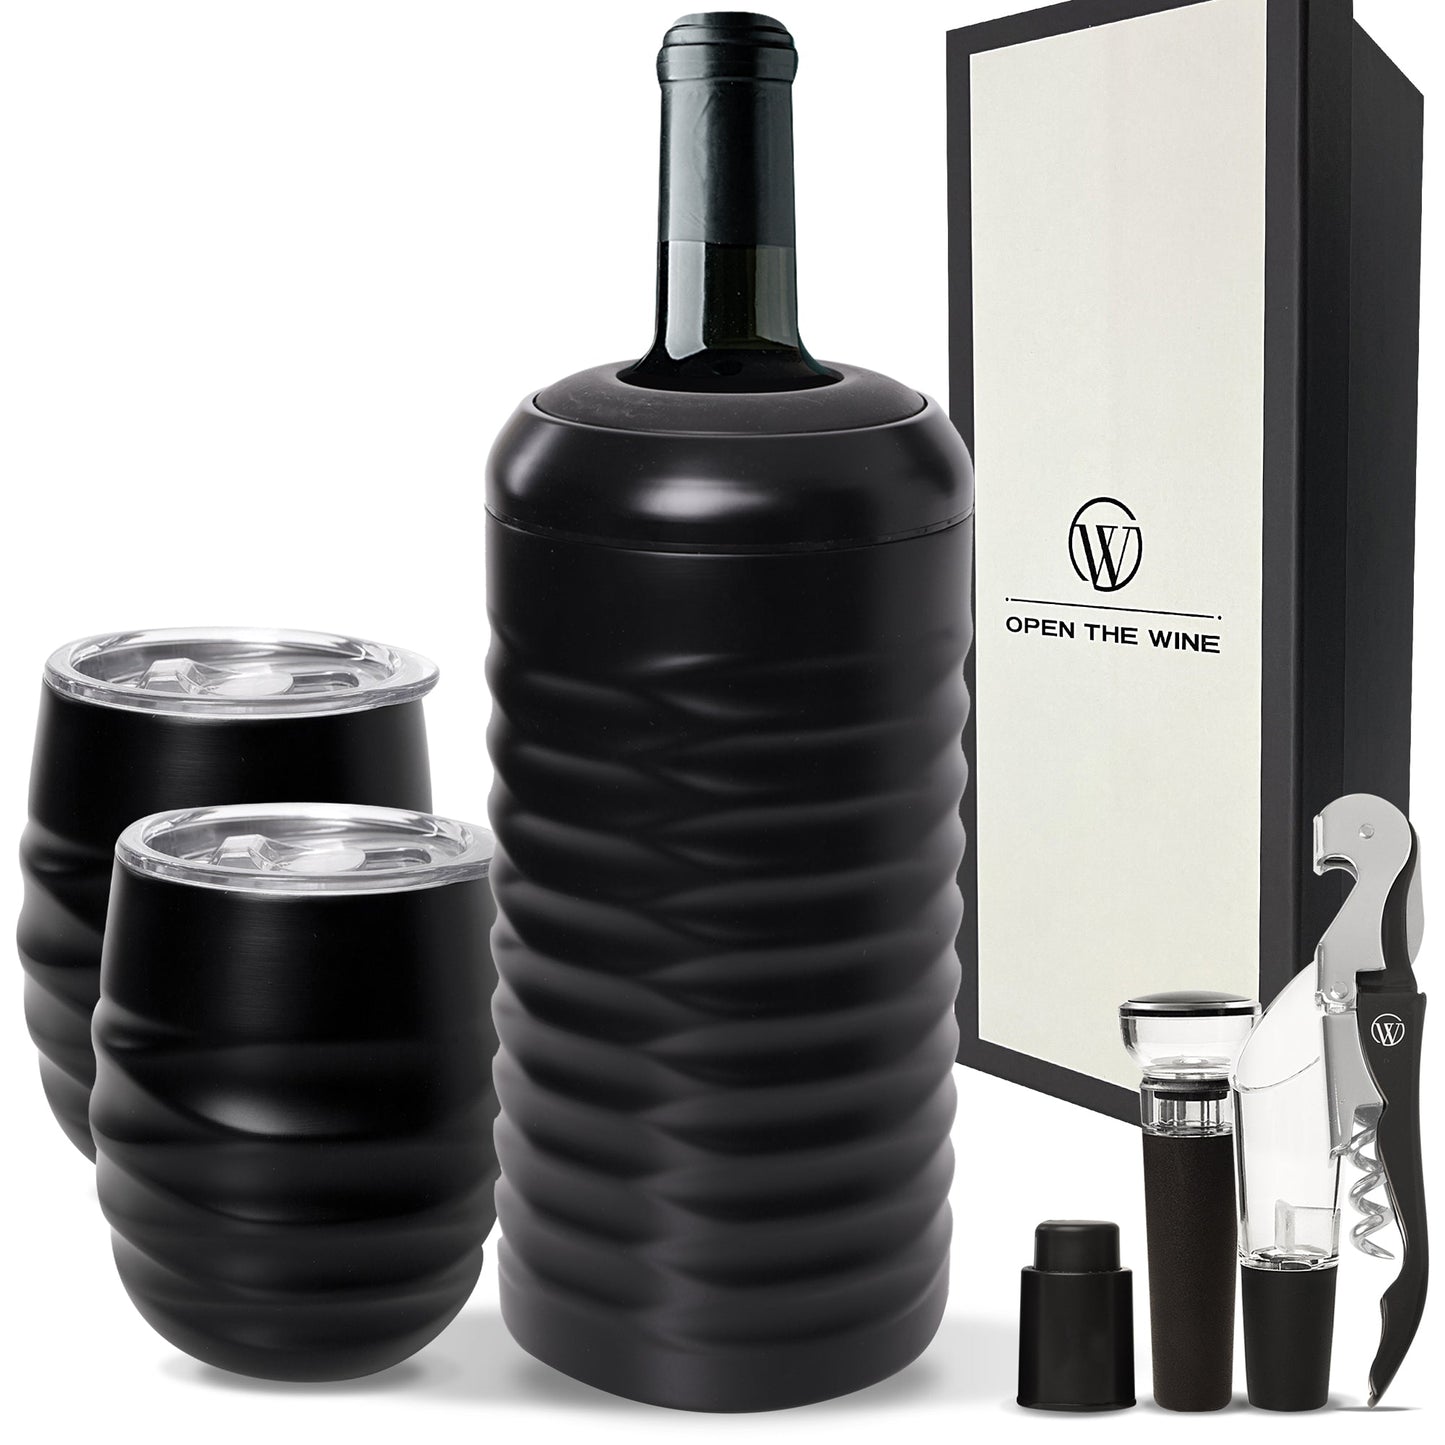 Open The Wine Complete Package Stylish Wine Chiller Bundle Box - All In One Wine Kit - Ideal Gift For Wine lovers - Black Color - Open The Wine